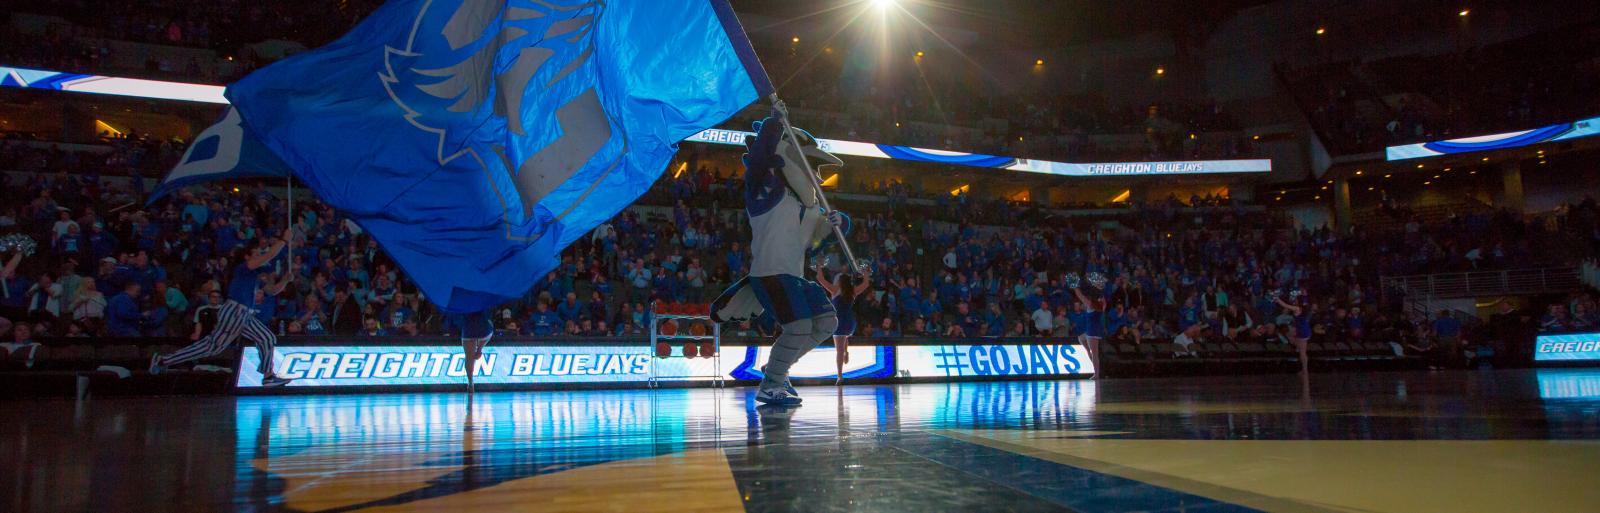 Creighton flag with Billy Bluejay